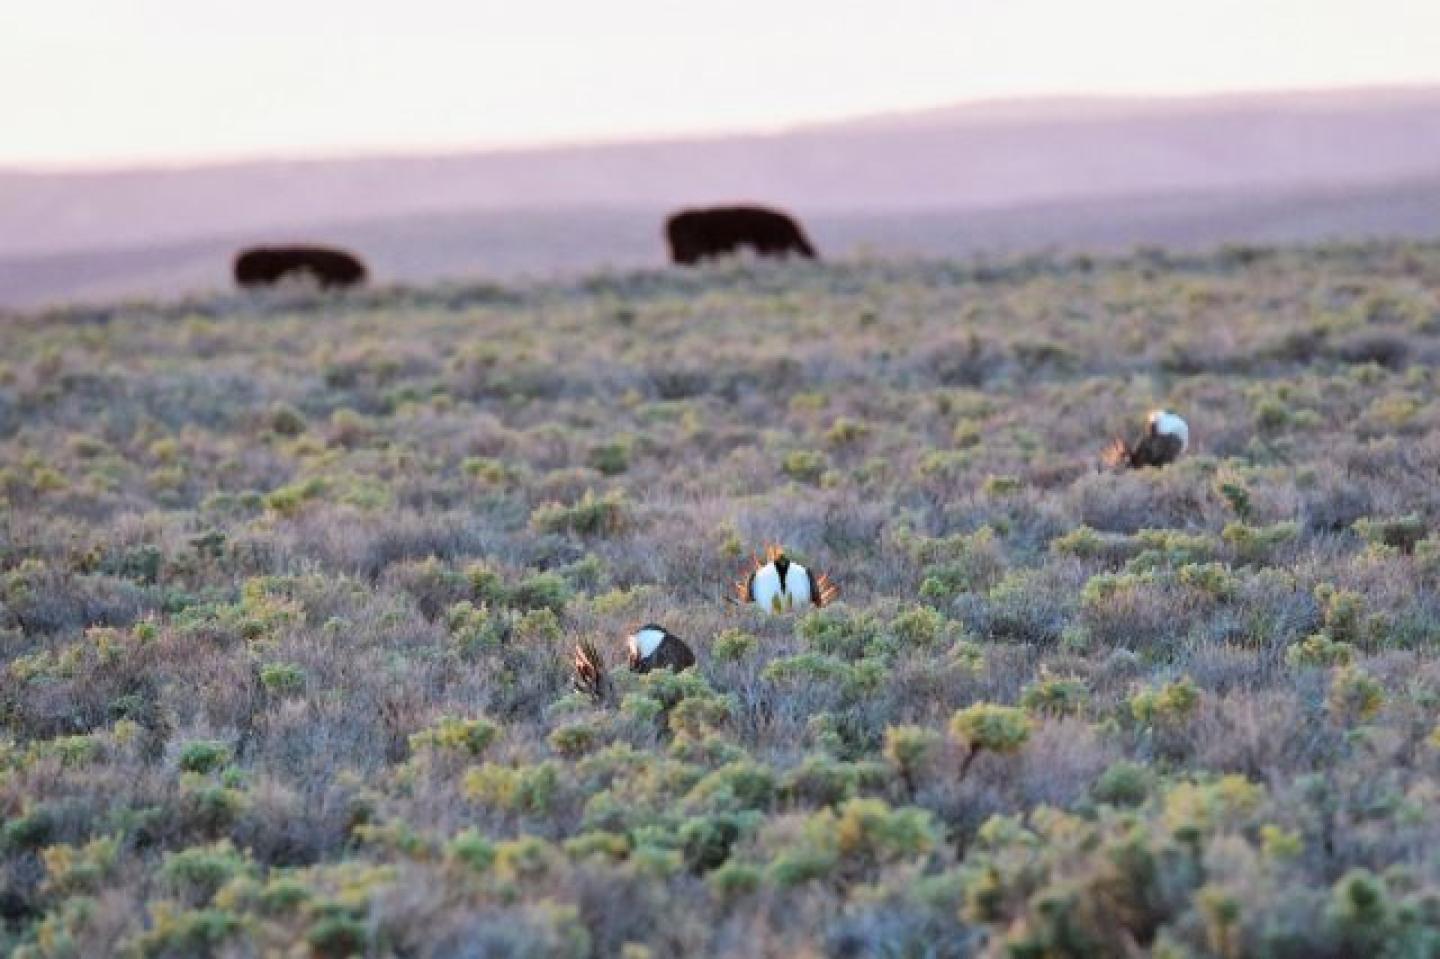 Cattle graze in the background, with sage grouse in sagebrush in the foreground.